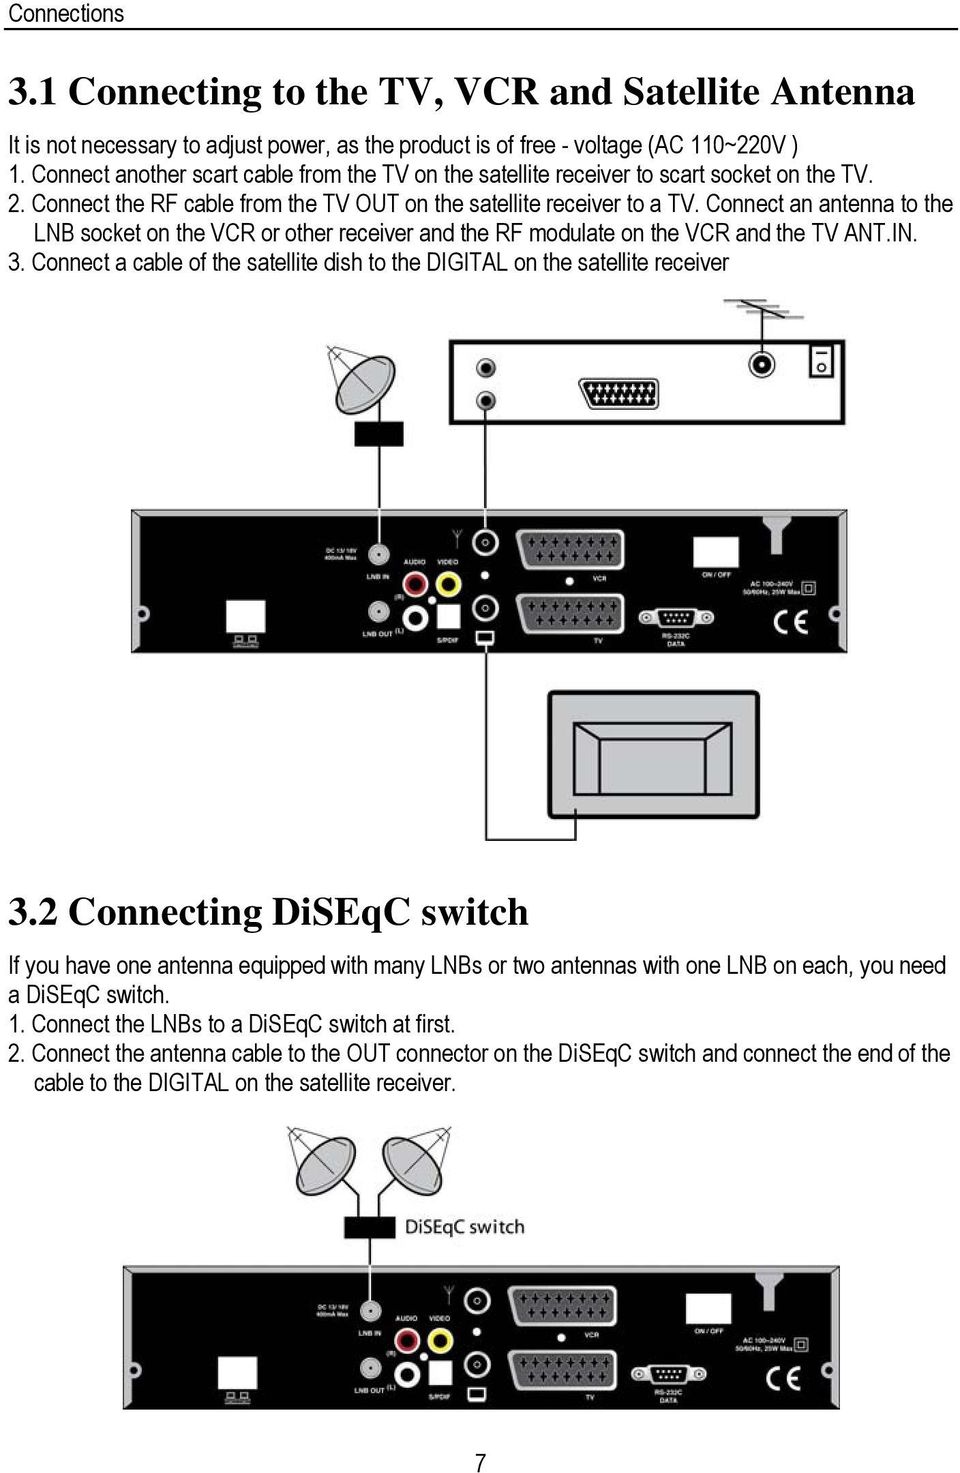 Connect an antenna to the LNB socket on the VCR or other receiver and the RF modulate on the VCR and the TV ANT.IN. 3.